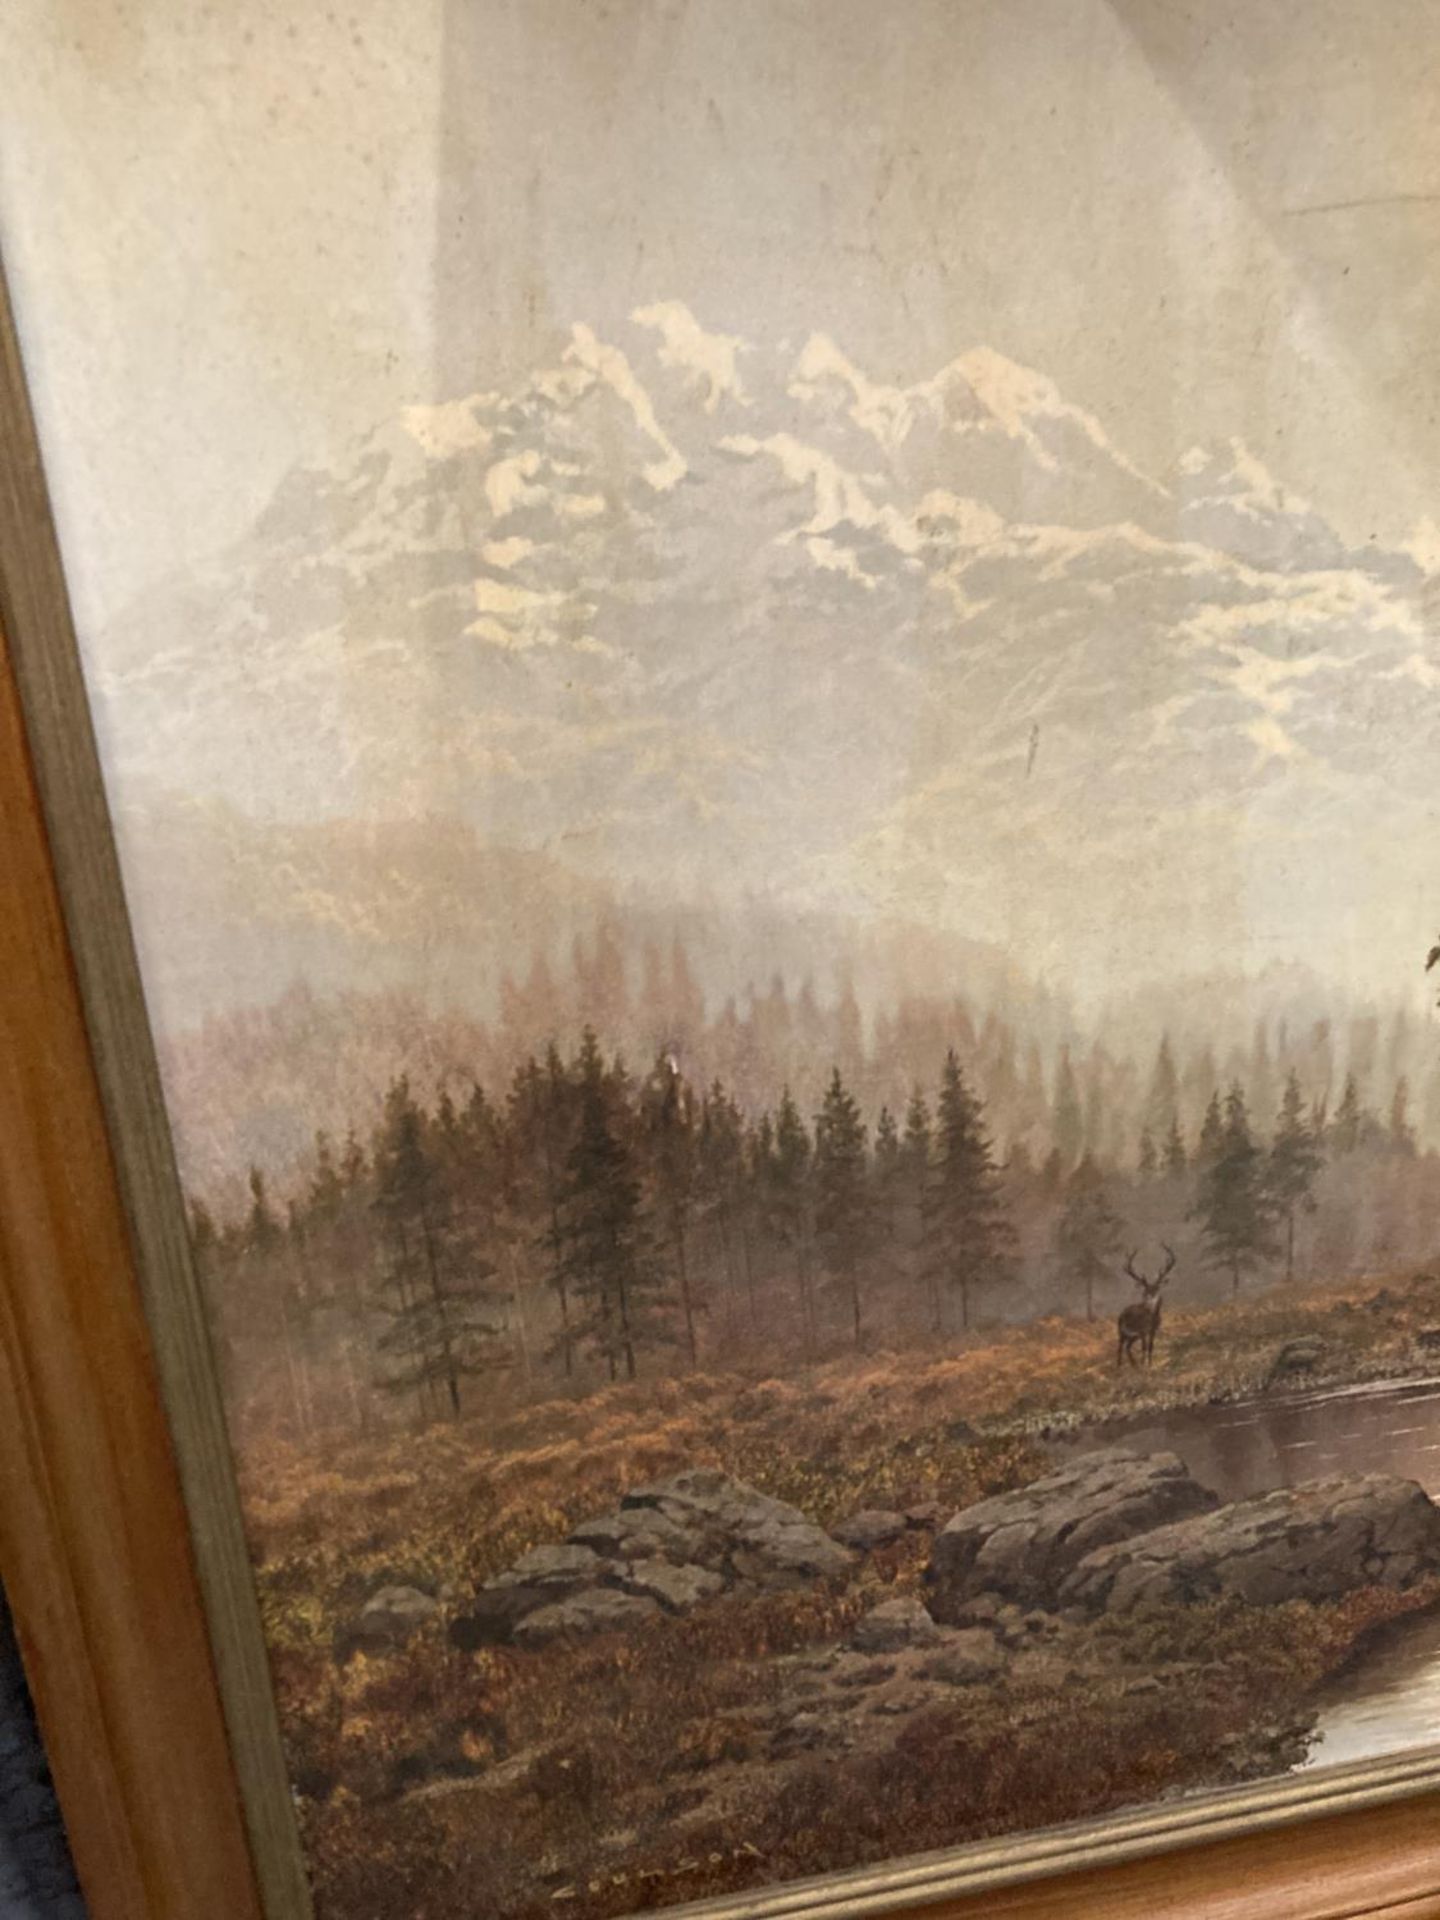 A FRAMED PRINT DEPICTING A LAKE SCENE WITH A STAG AND MOUNTAINOUS BACK DROP - Image 3 of 4